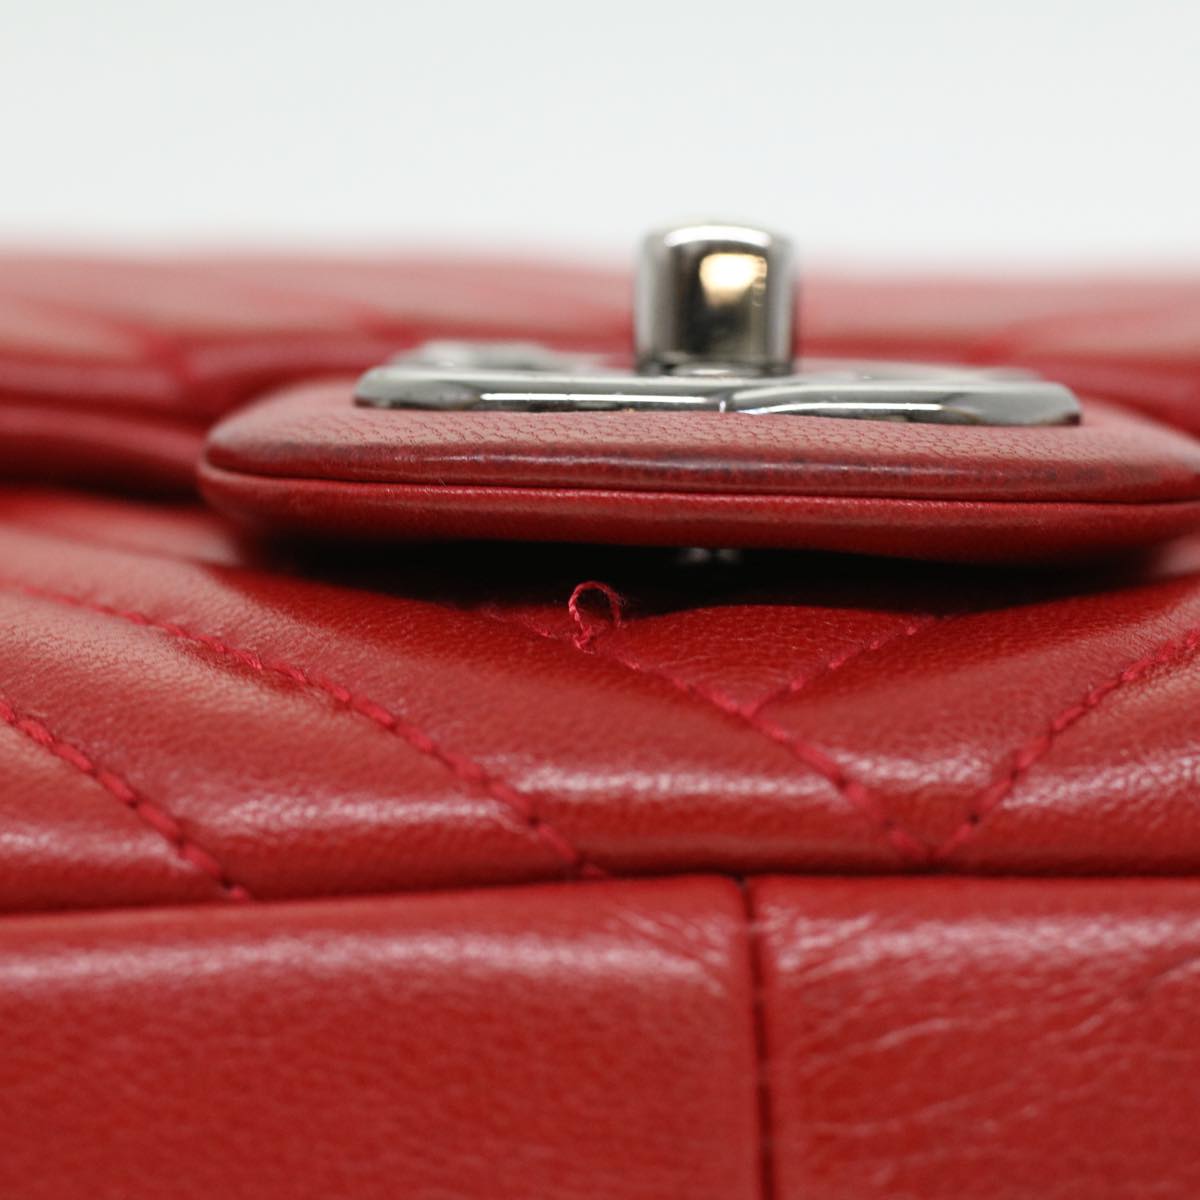 CHANEL Chain Shoulder Bag Lamb Skin Red CC Auth bs3636A